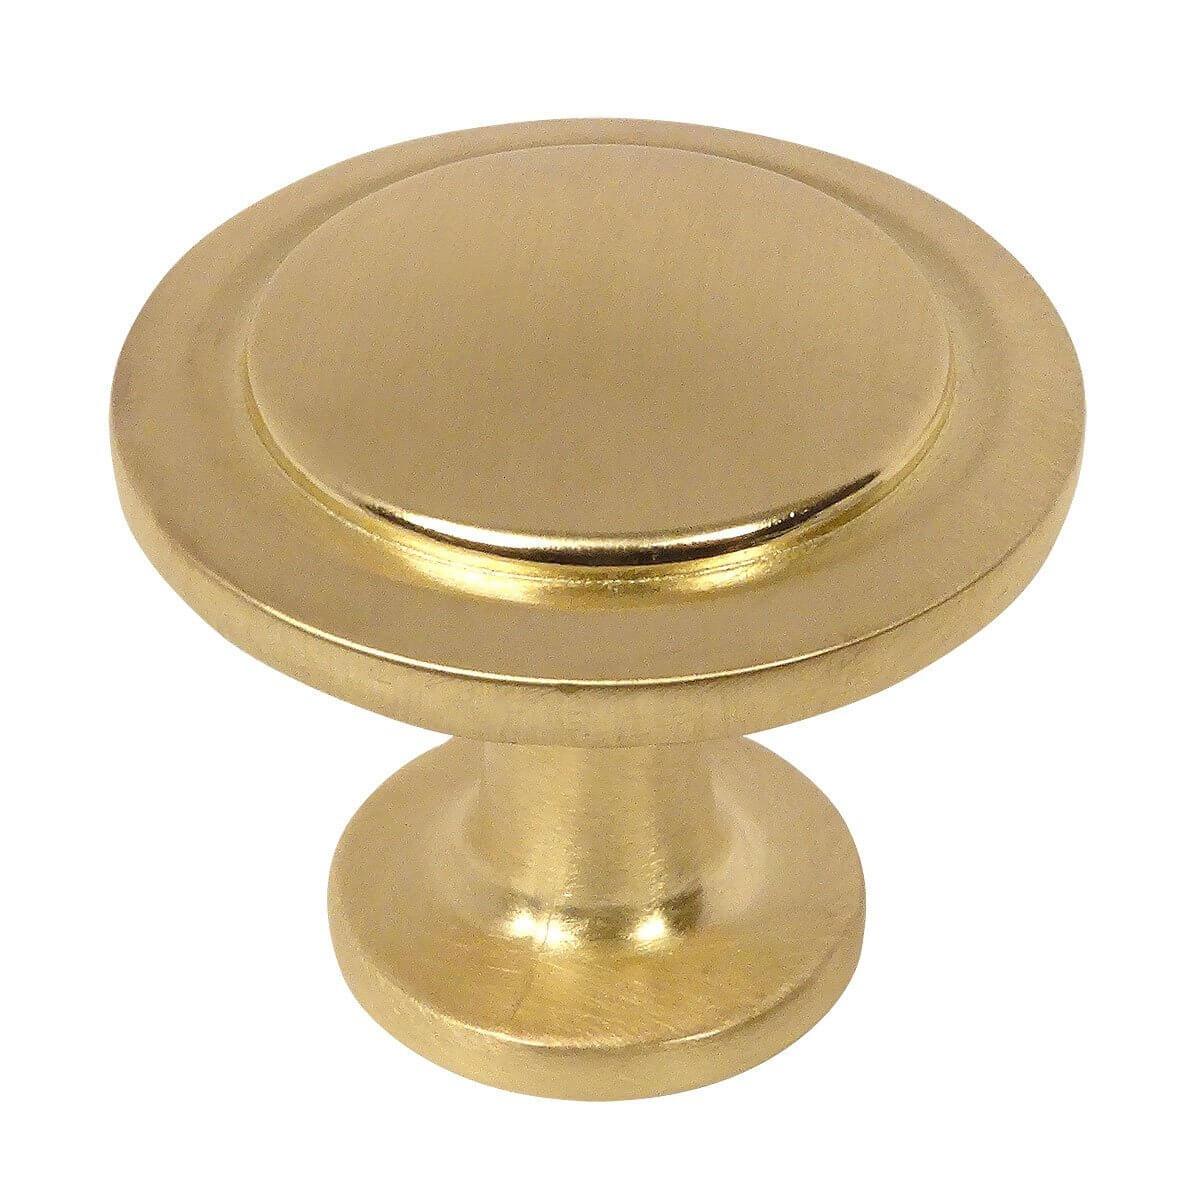 Round cabinet knob in brushed brass finish with subtle circle carving